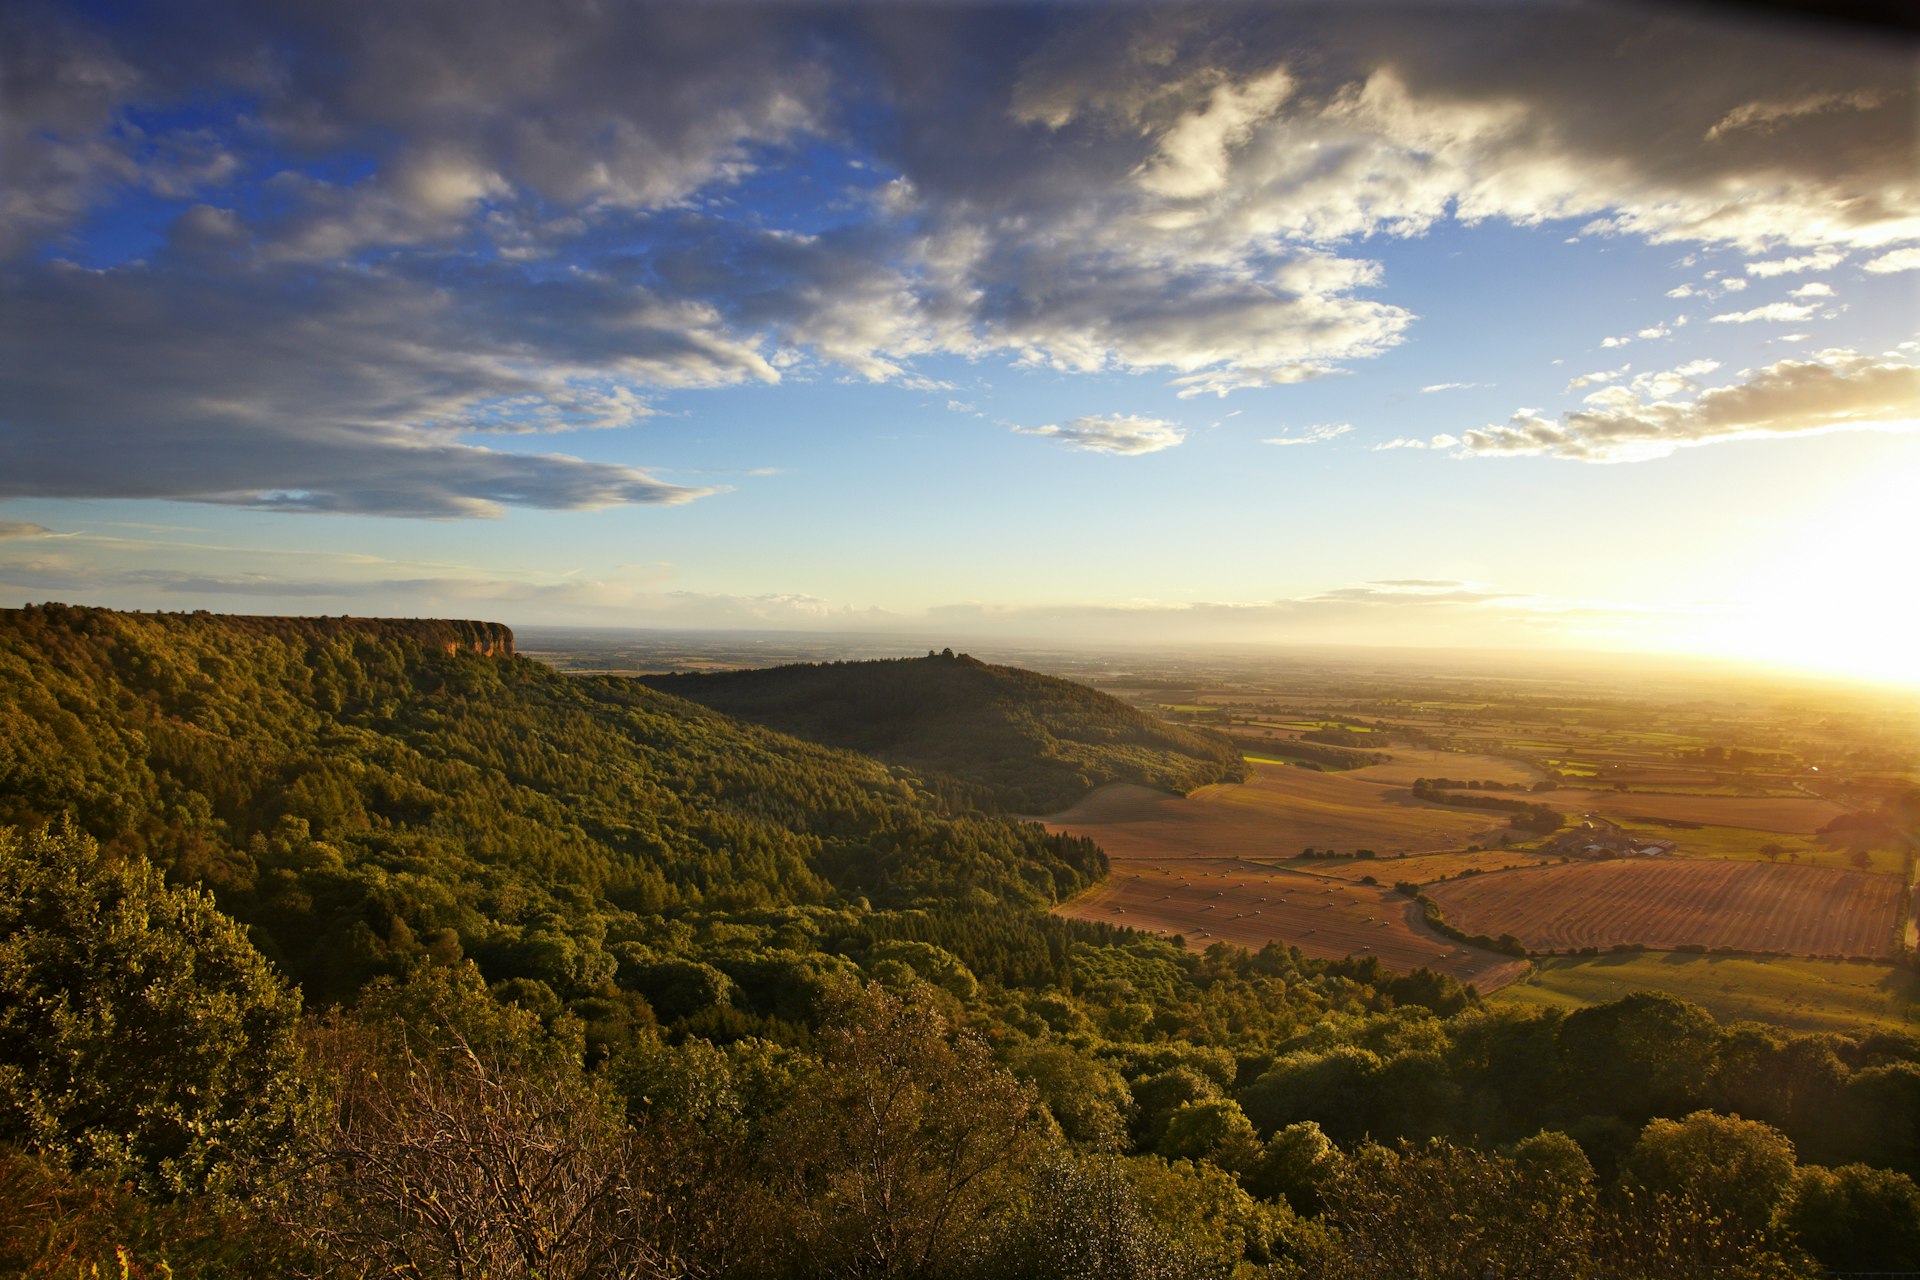 View from Sutton Bank at sunset in North York Moors National Park, England